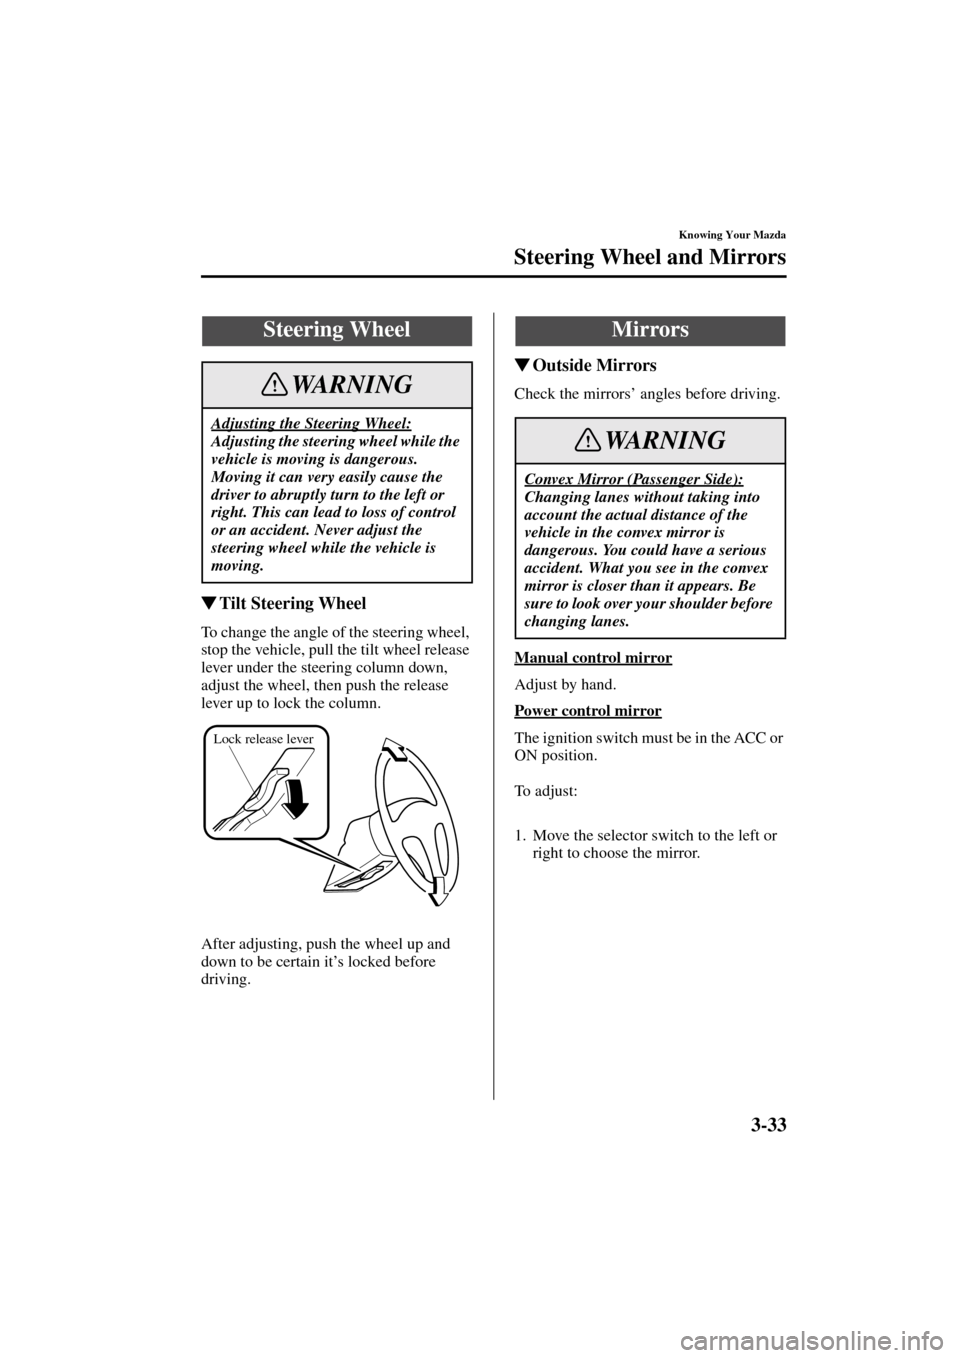 MAZDA MODEL MPV 2004  Owners Manual (in English) 3-33
Knowing Your Mazda
Form No. 8S06-EA-03H
Steering Wheel and Mirrors
Tilt Steering Wheel
To change the angle of the steering wheel, 
stop the vehicle, pull the tilt wheel release 
lever under the 